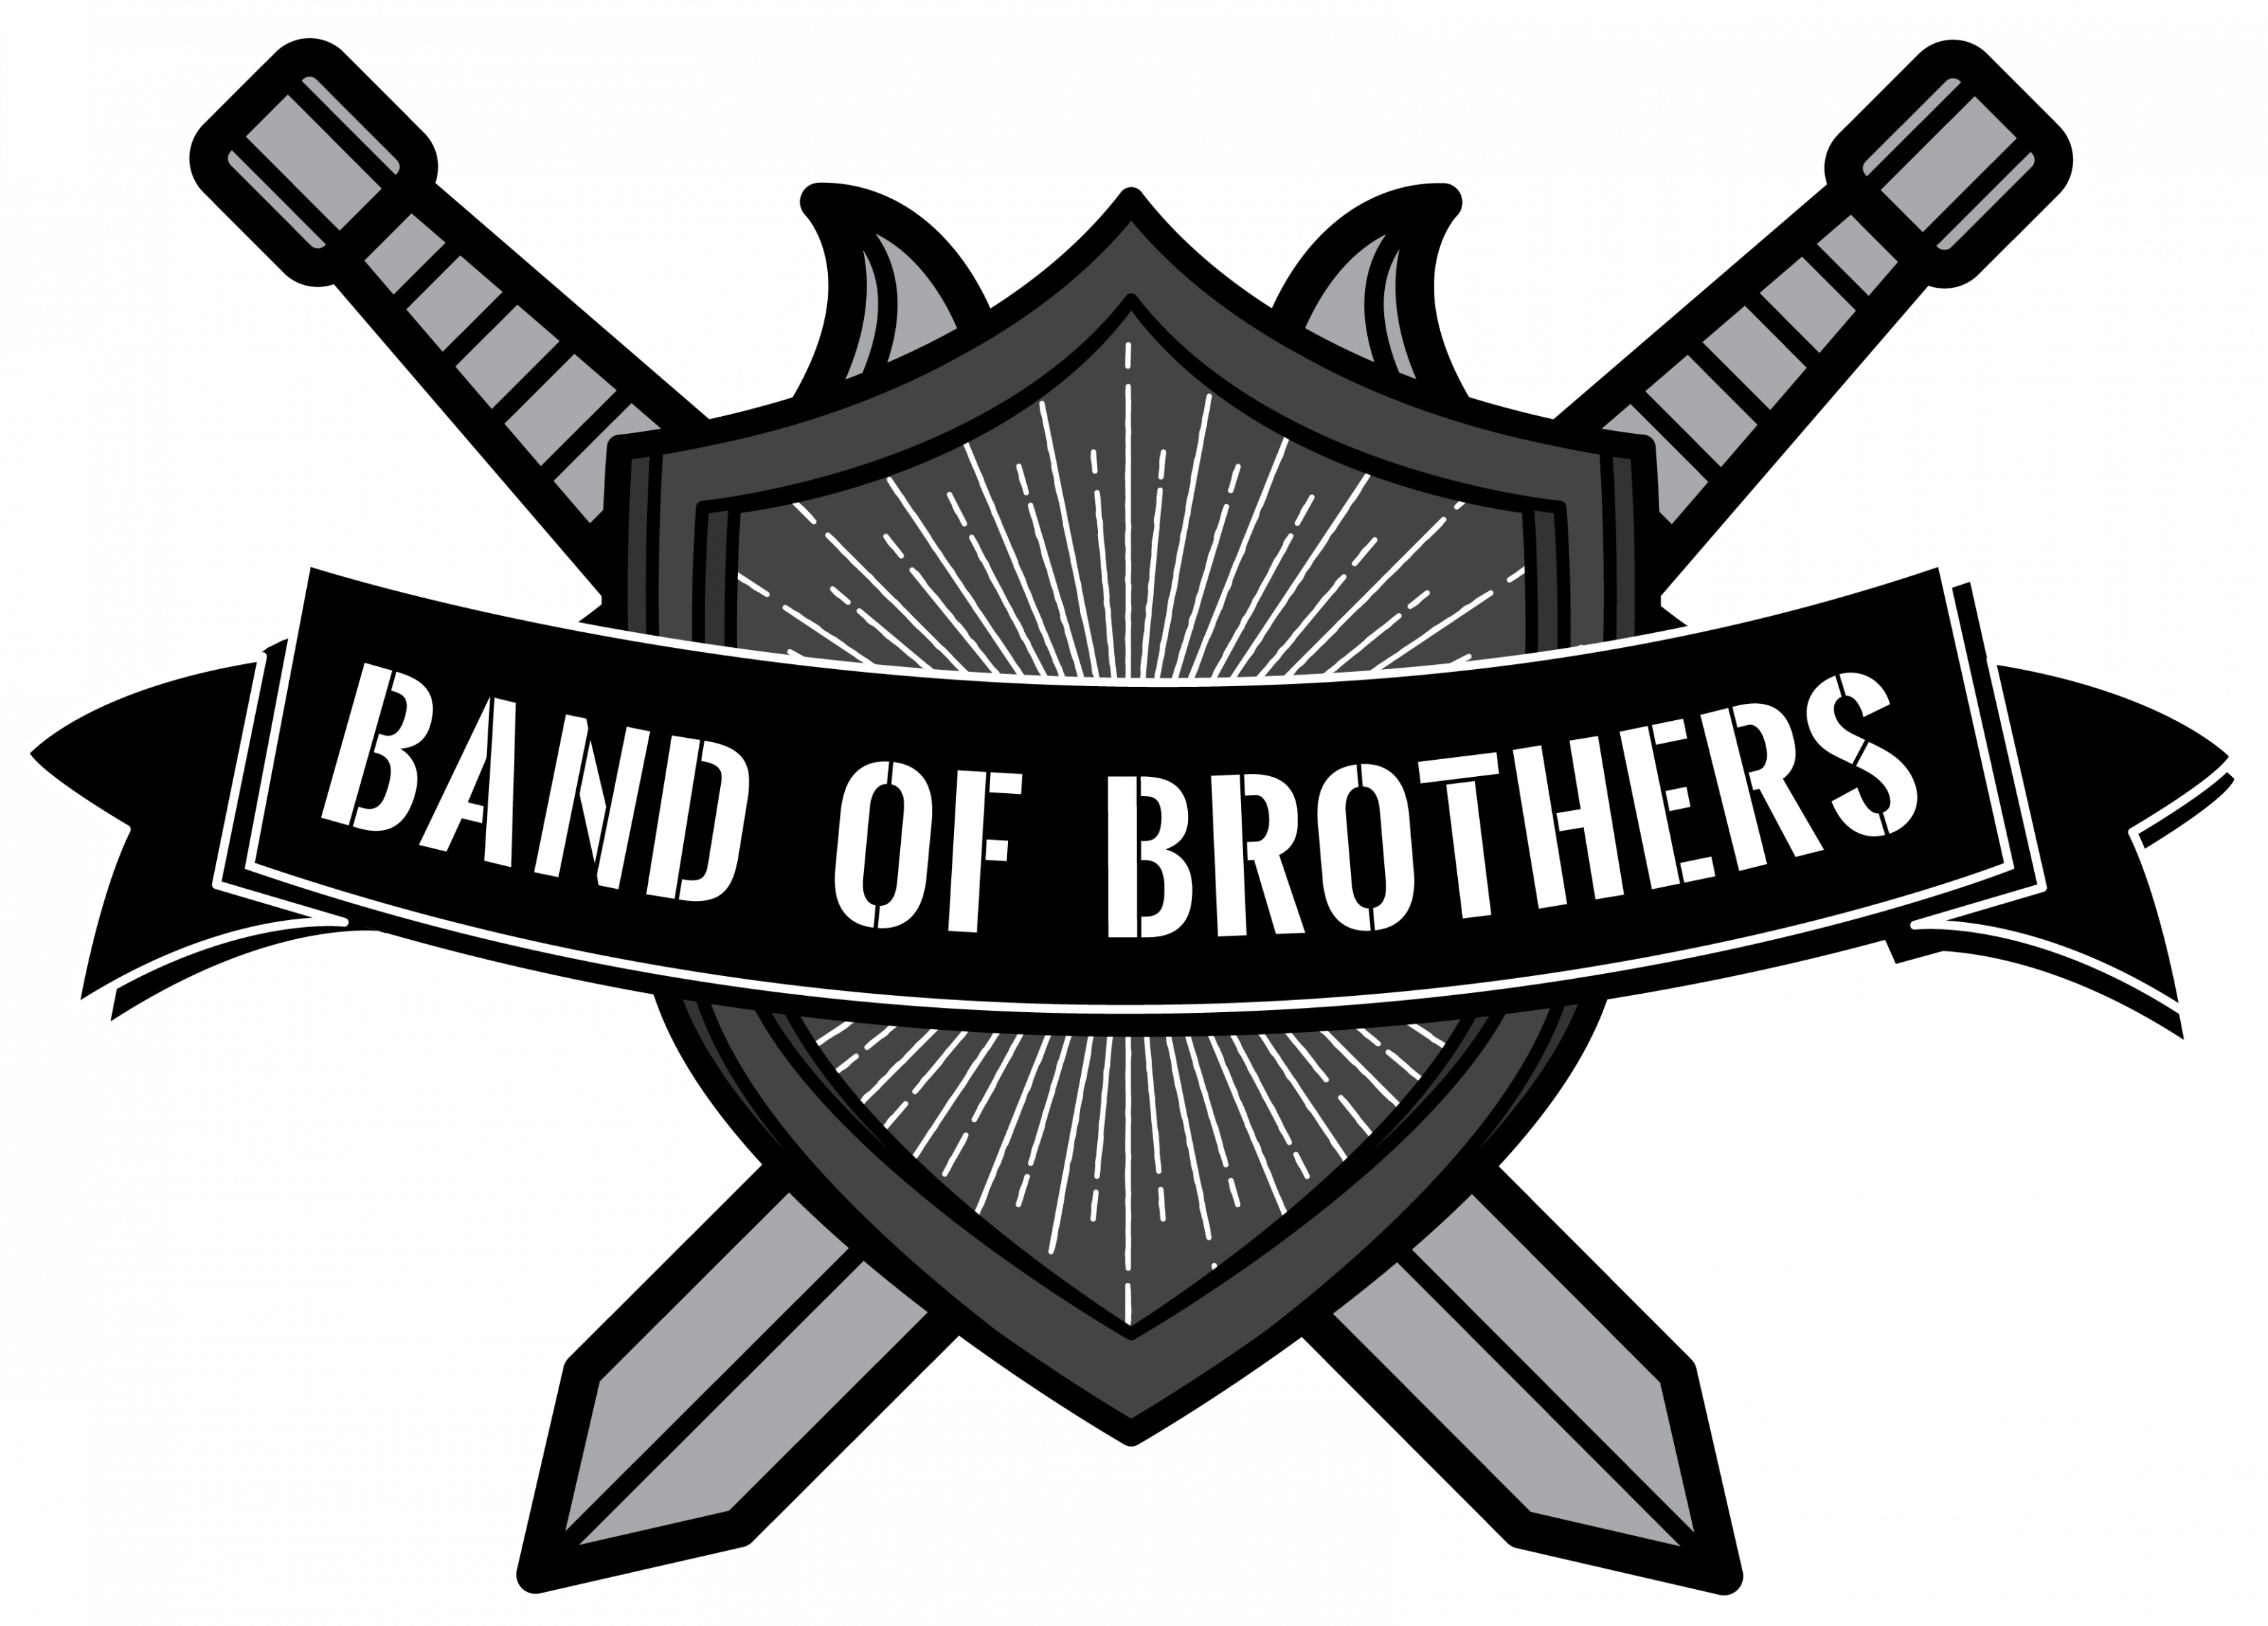 Band of Brothers Logo - Sexual and Porn Addiction Treatment, Family Counselling in AZ